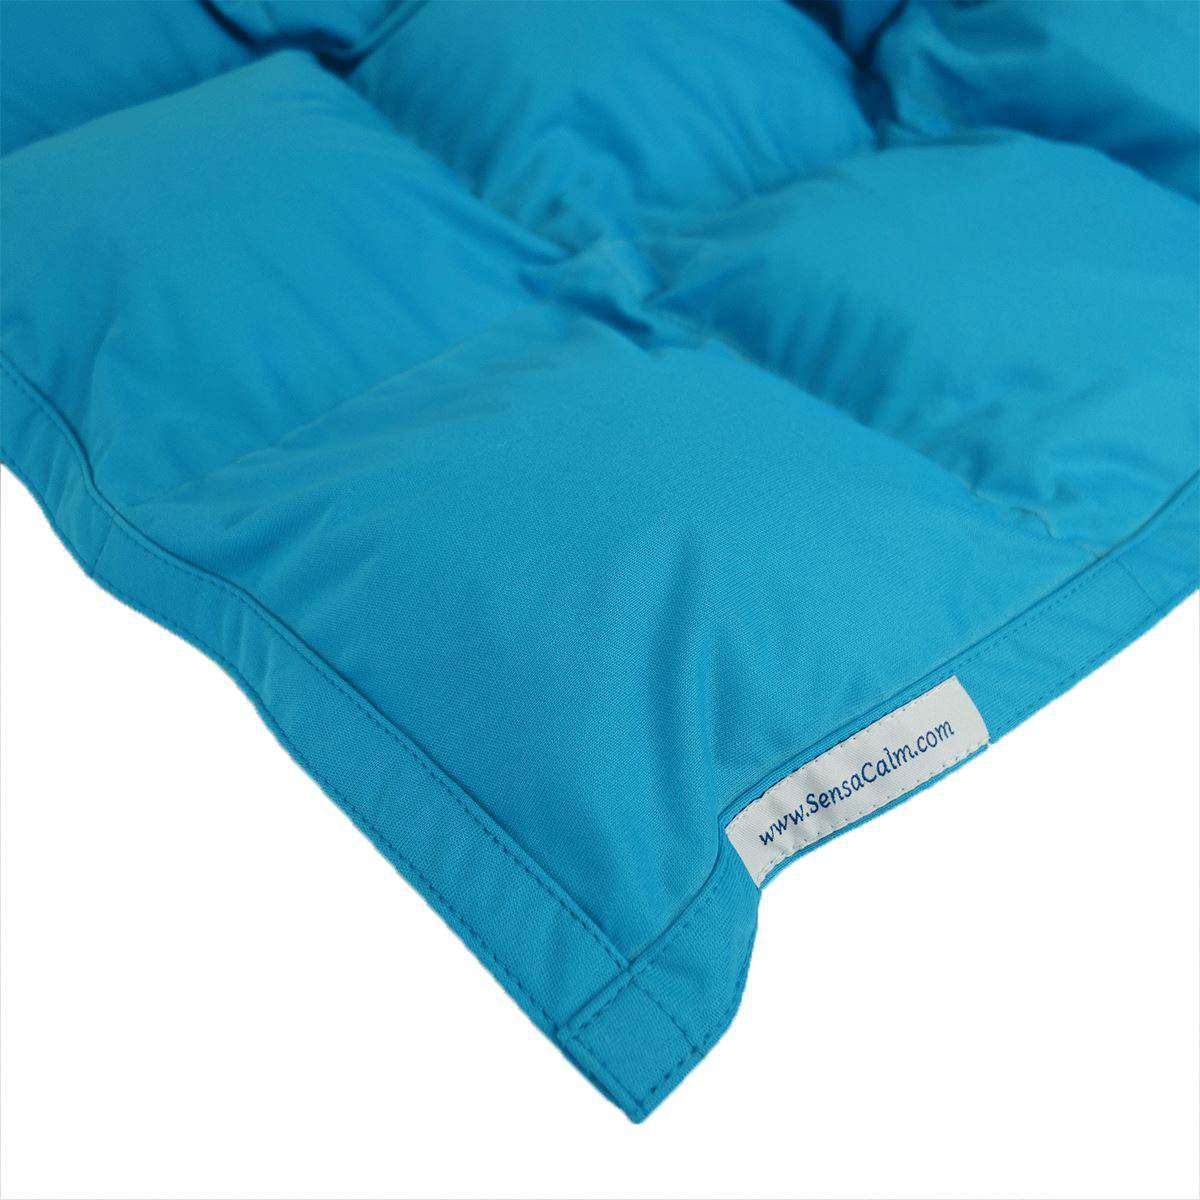 Waterproof Weighted Blanket - Turquoise